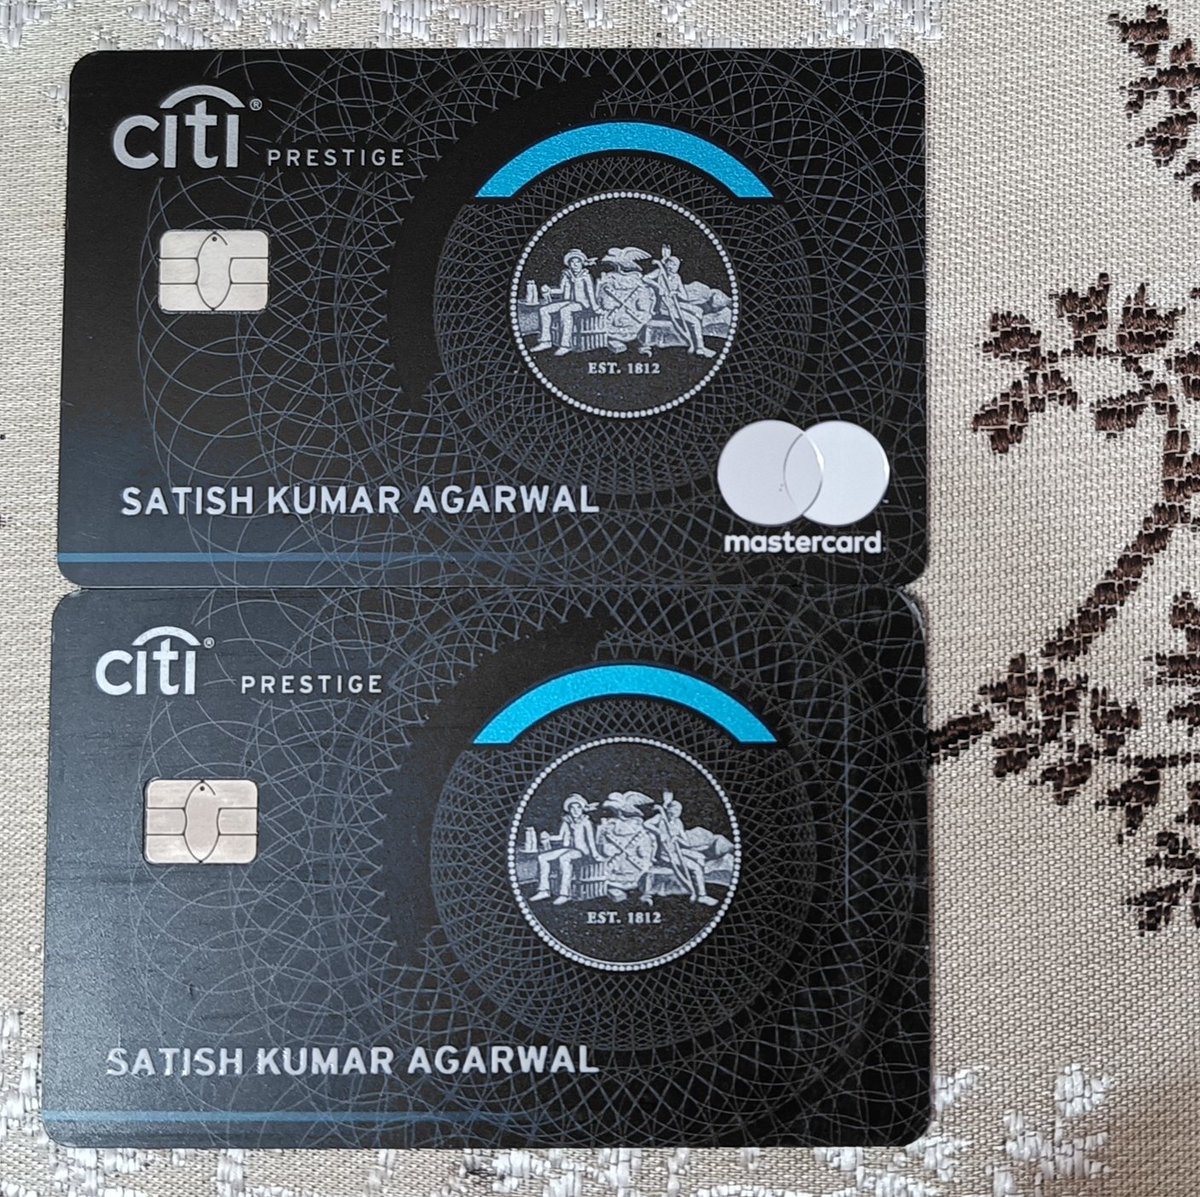 Awesome new look: Citi Prestige ❤️ ✨MC World Elite logo comes on front ✨Shinier & Brighter than in image ✨Requested Card replacement ✨No fee charged #ccgeek